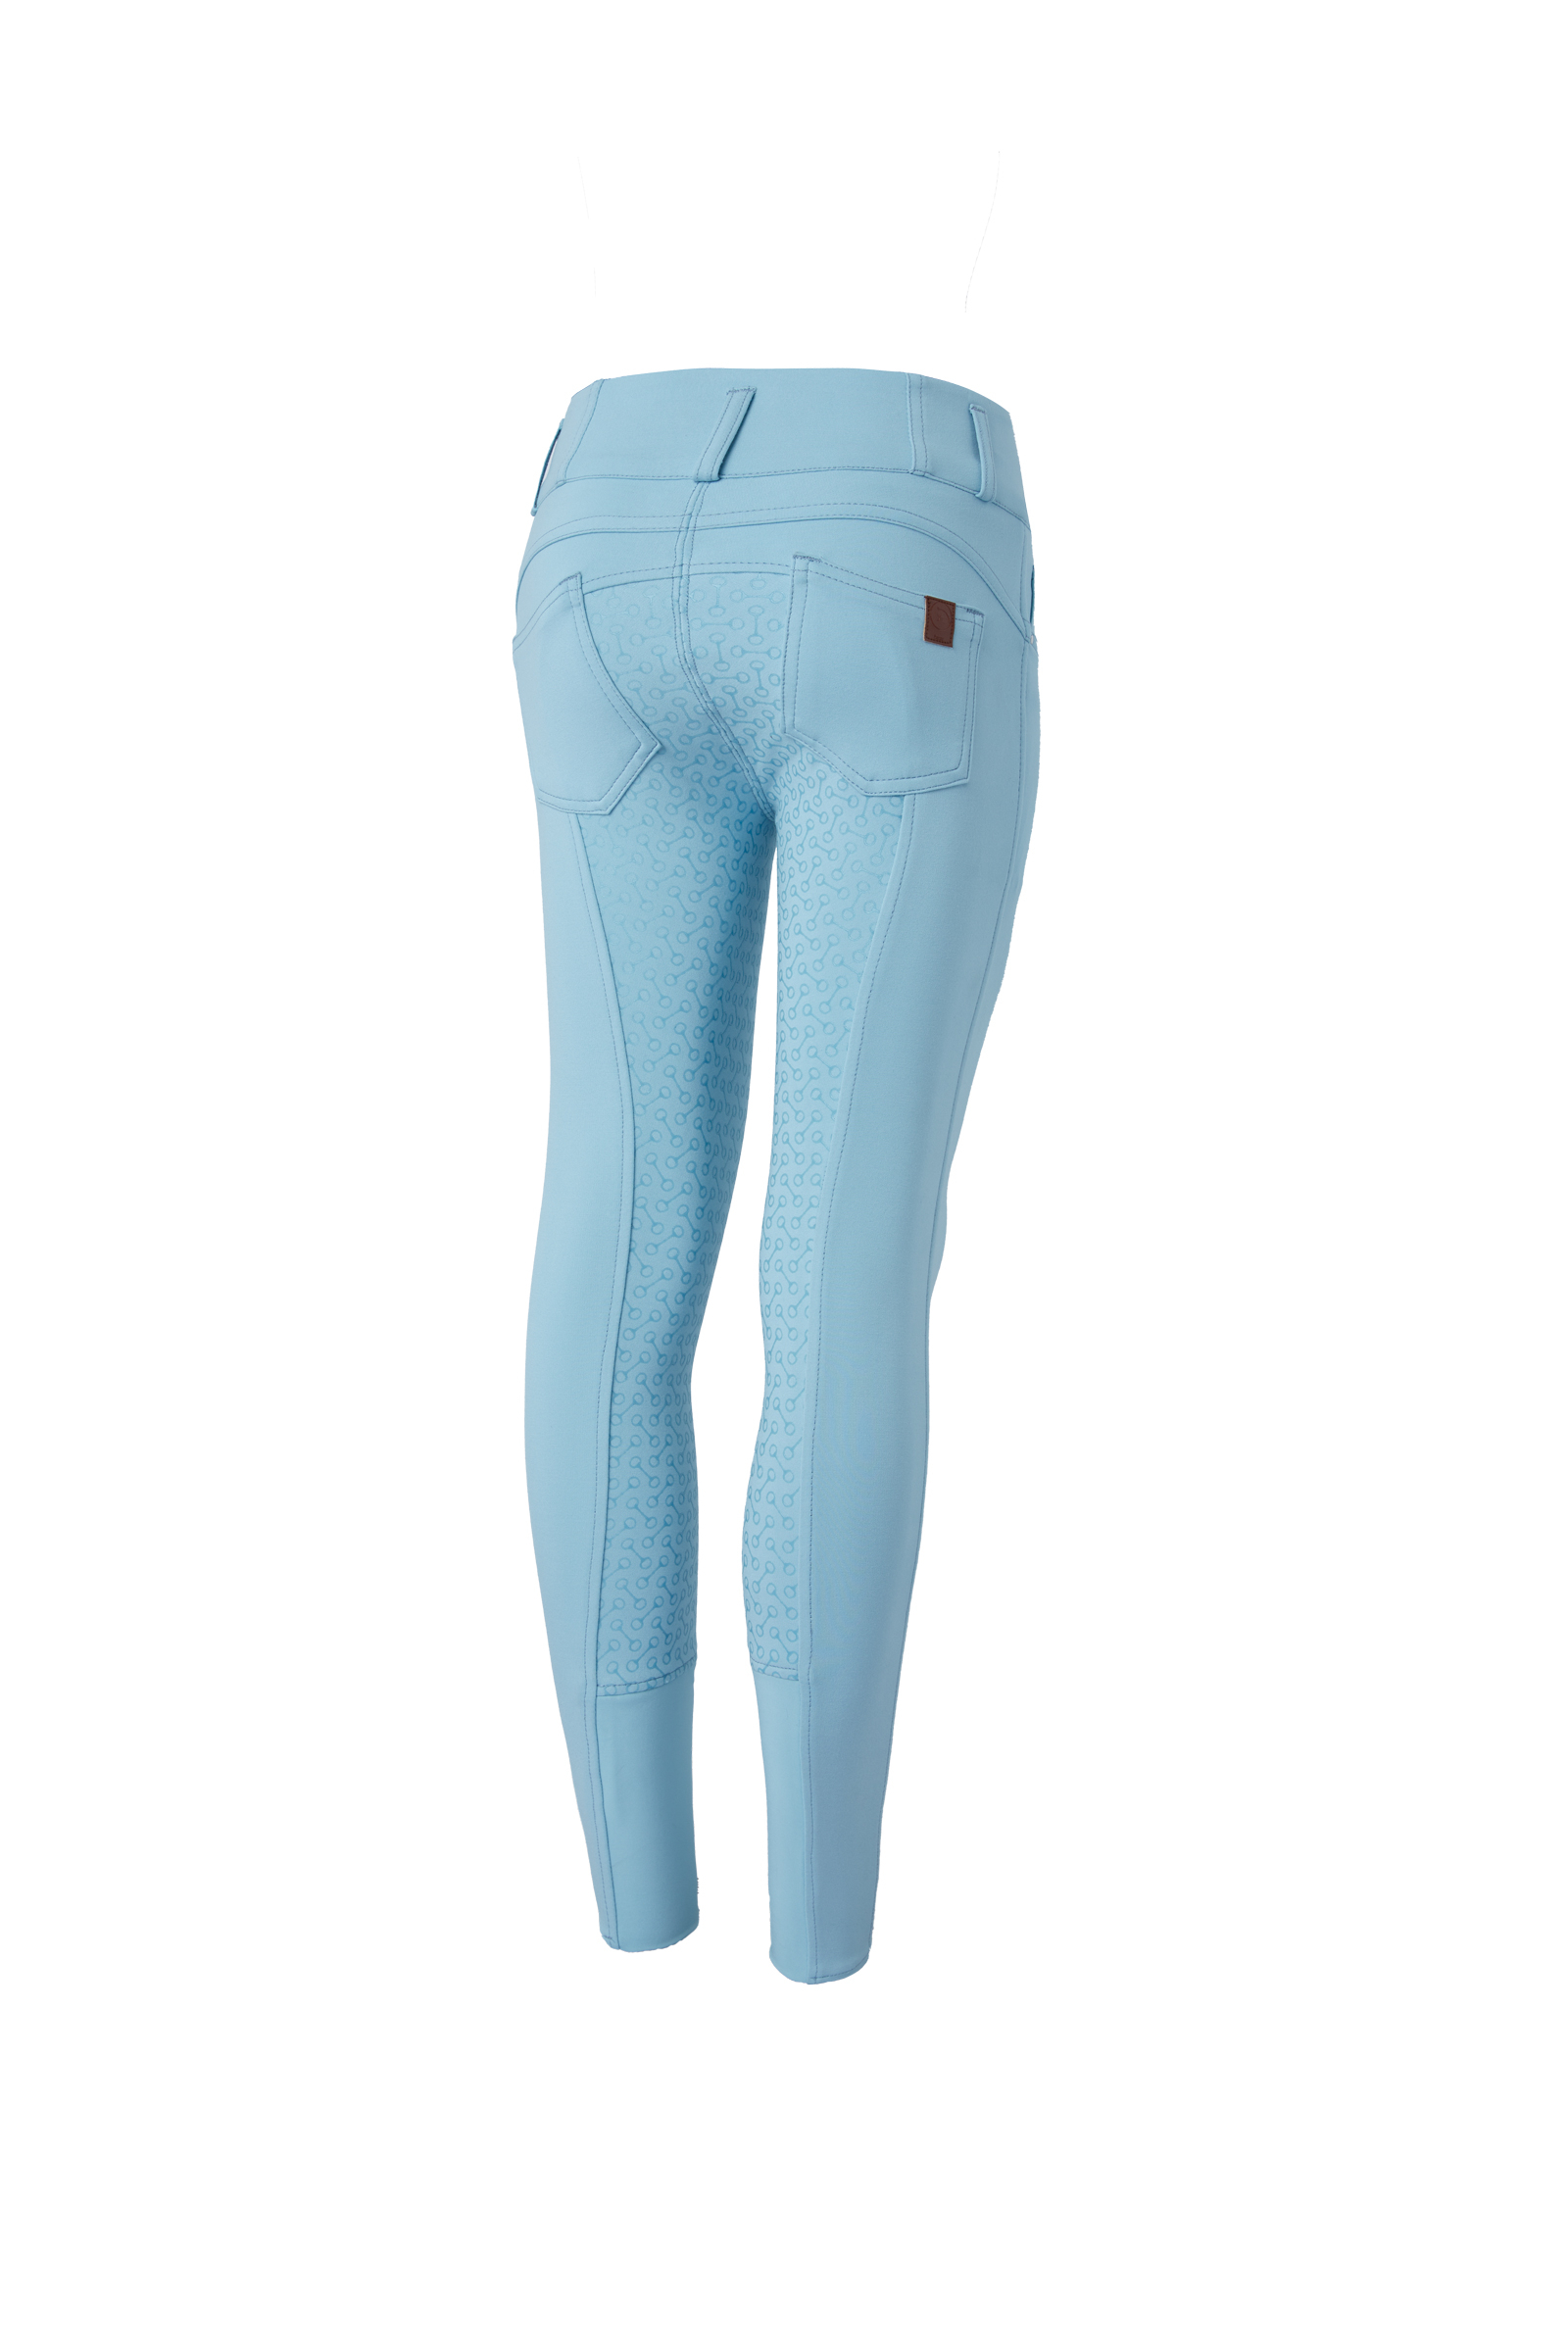 Horze Women's Denim Breeches with High Waist and Silicone Full Seat